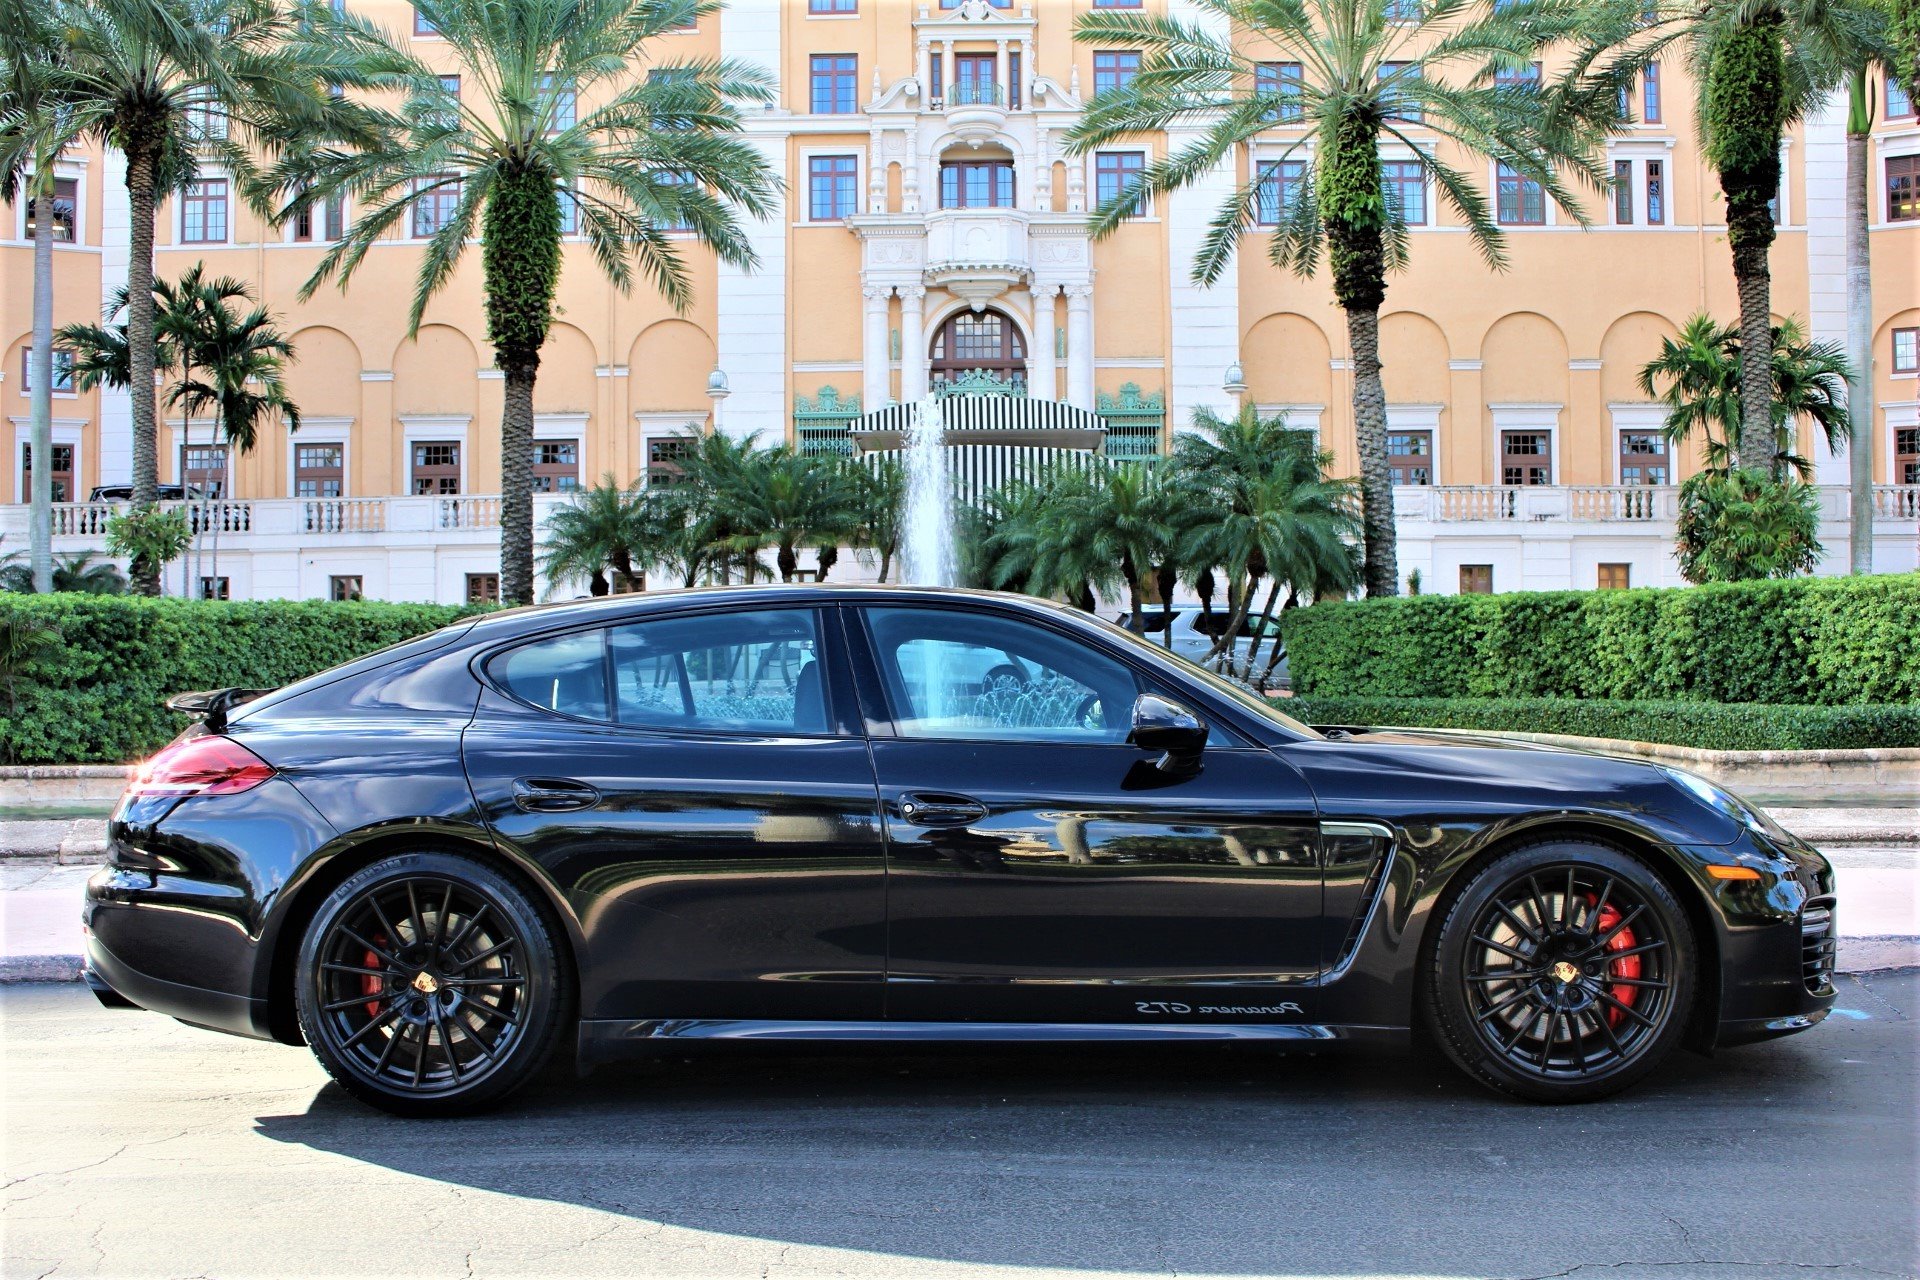 Used 2014 Porsche Panamera GTS for sale Sold at The Gables Sports Cars in Miami FL 33146 1